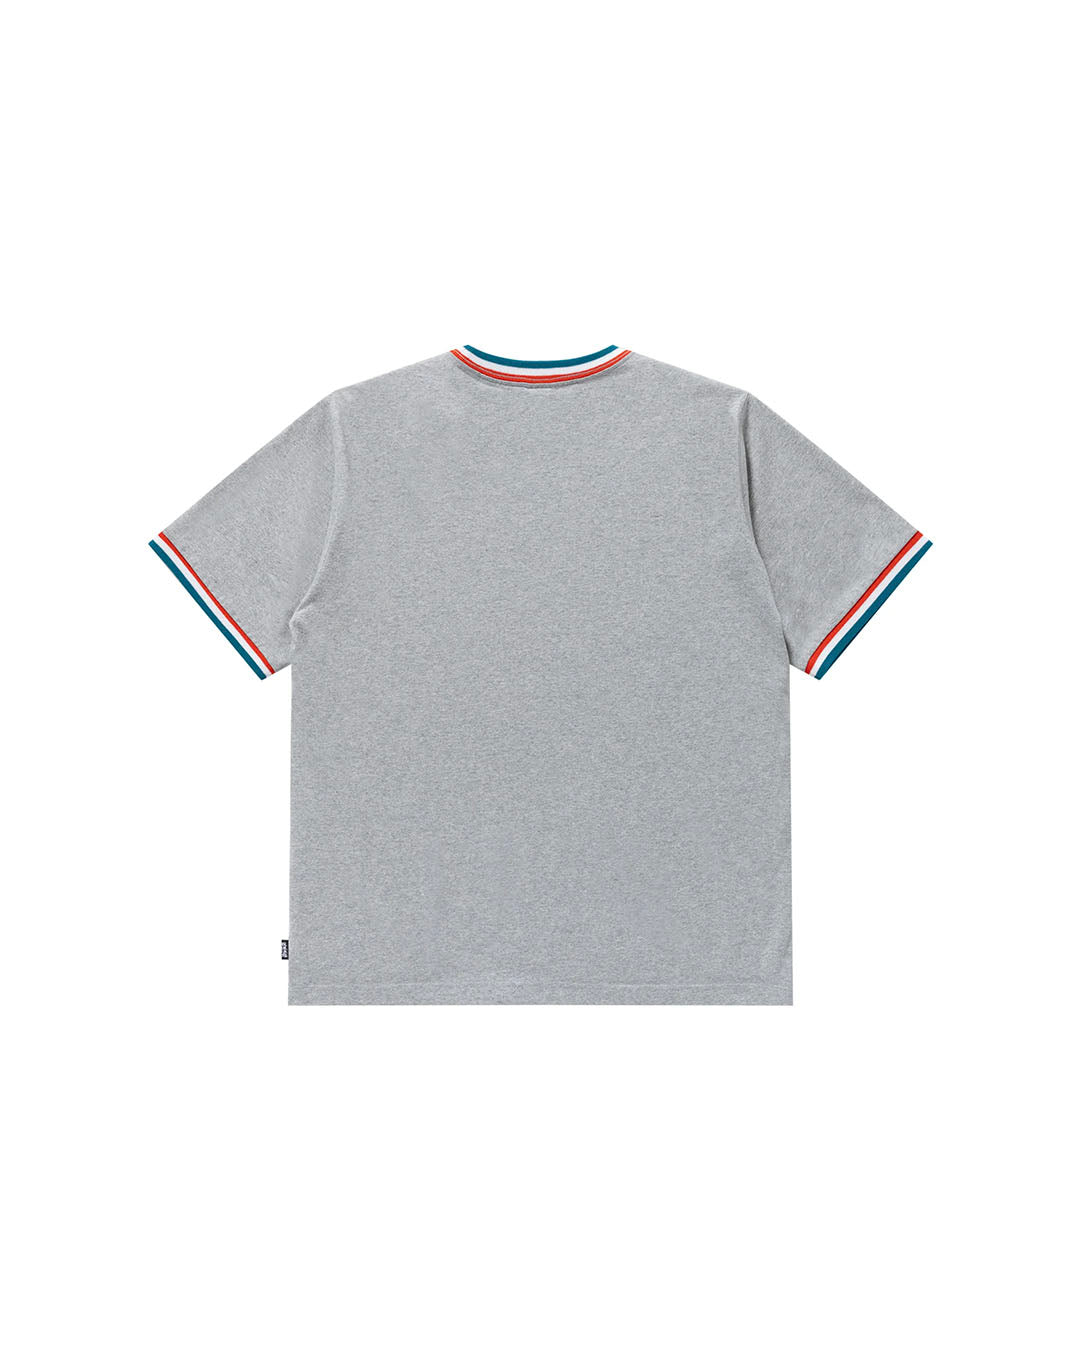 【BLACKEYEPATCH】SMALL OG LABEL RIB KNITTED TEE - HEATER GRAY